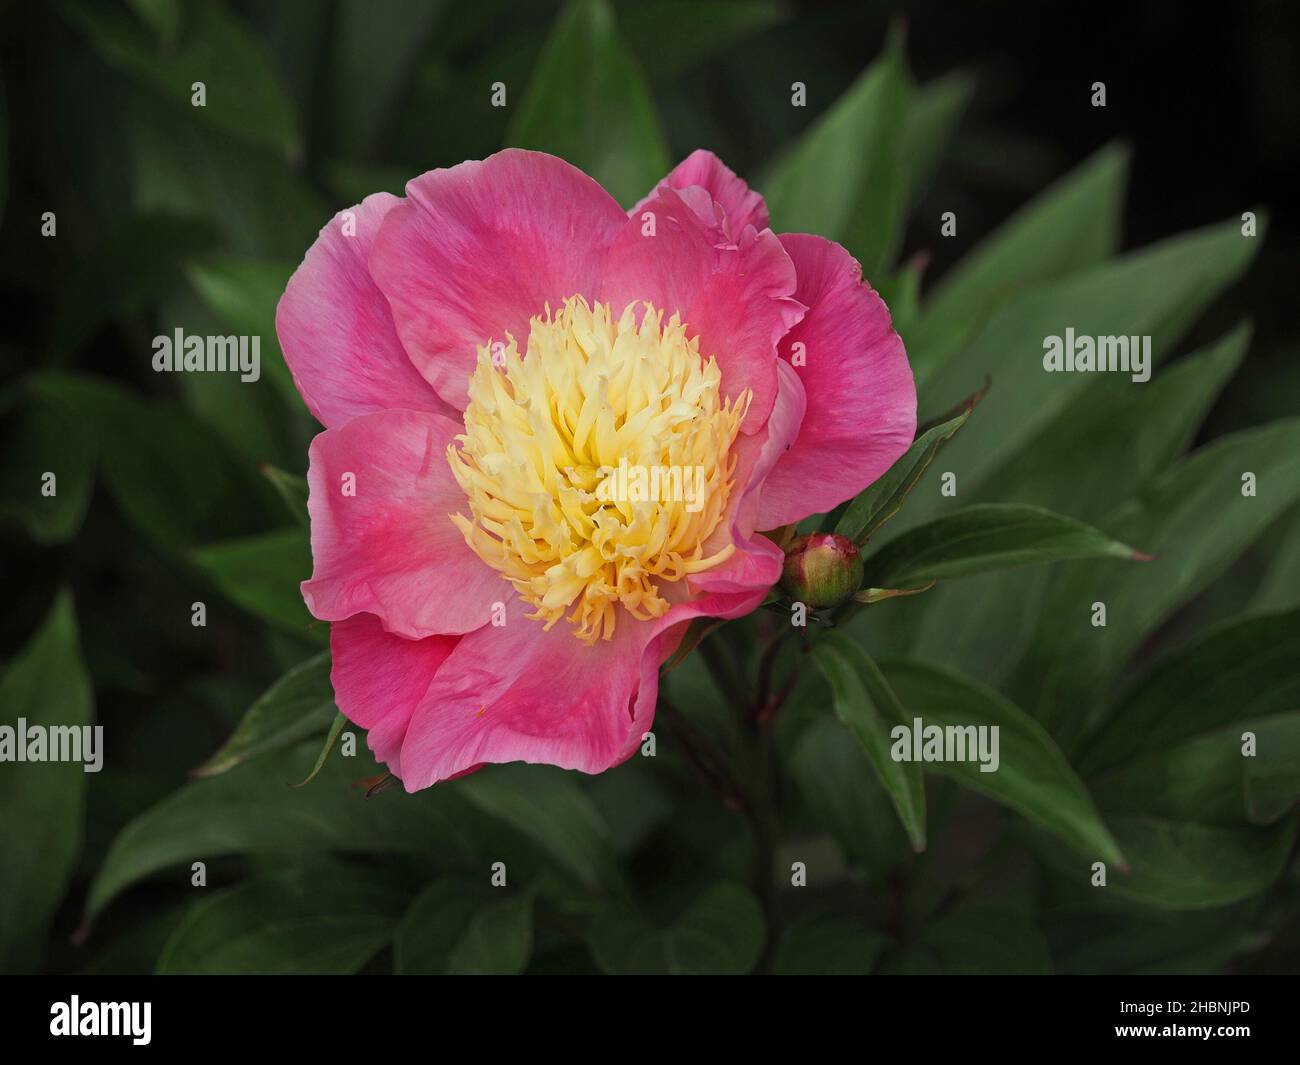 Exotic flower of cultivated Peony (Paeonia sp) with elaborate golden yellow stamens, delicate pink petals & green foliage in garden Cumbria,England,UK Stock Photo